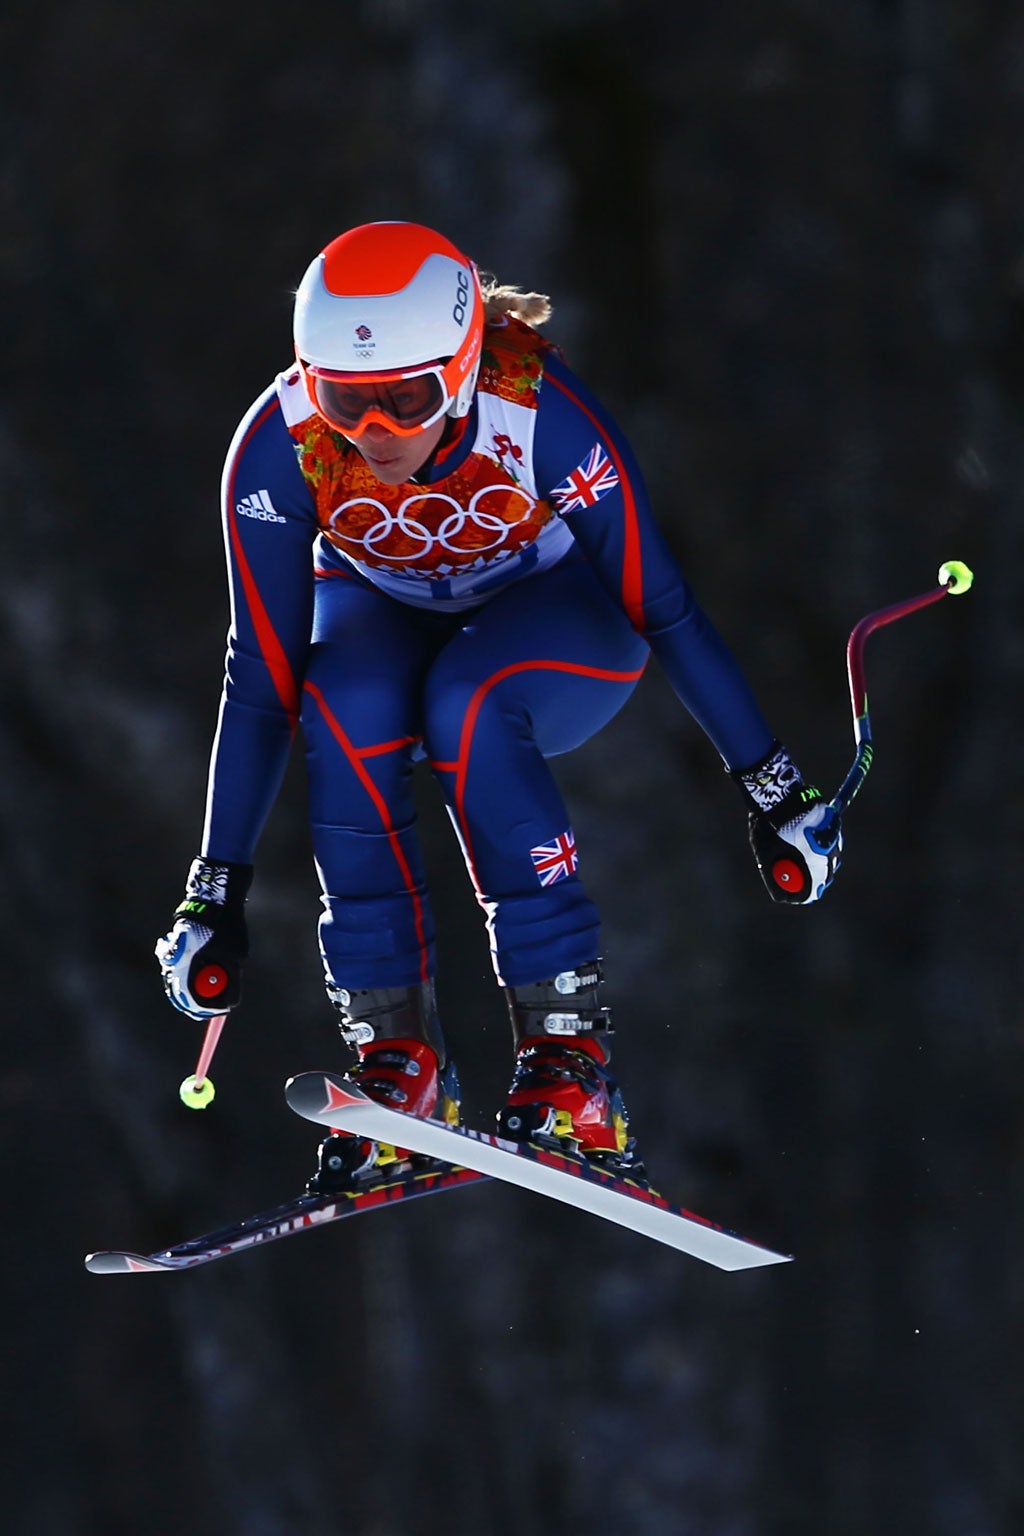 Chemmy Alcott finished in 19th place in the women's downhill skiing